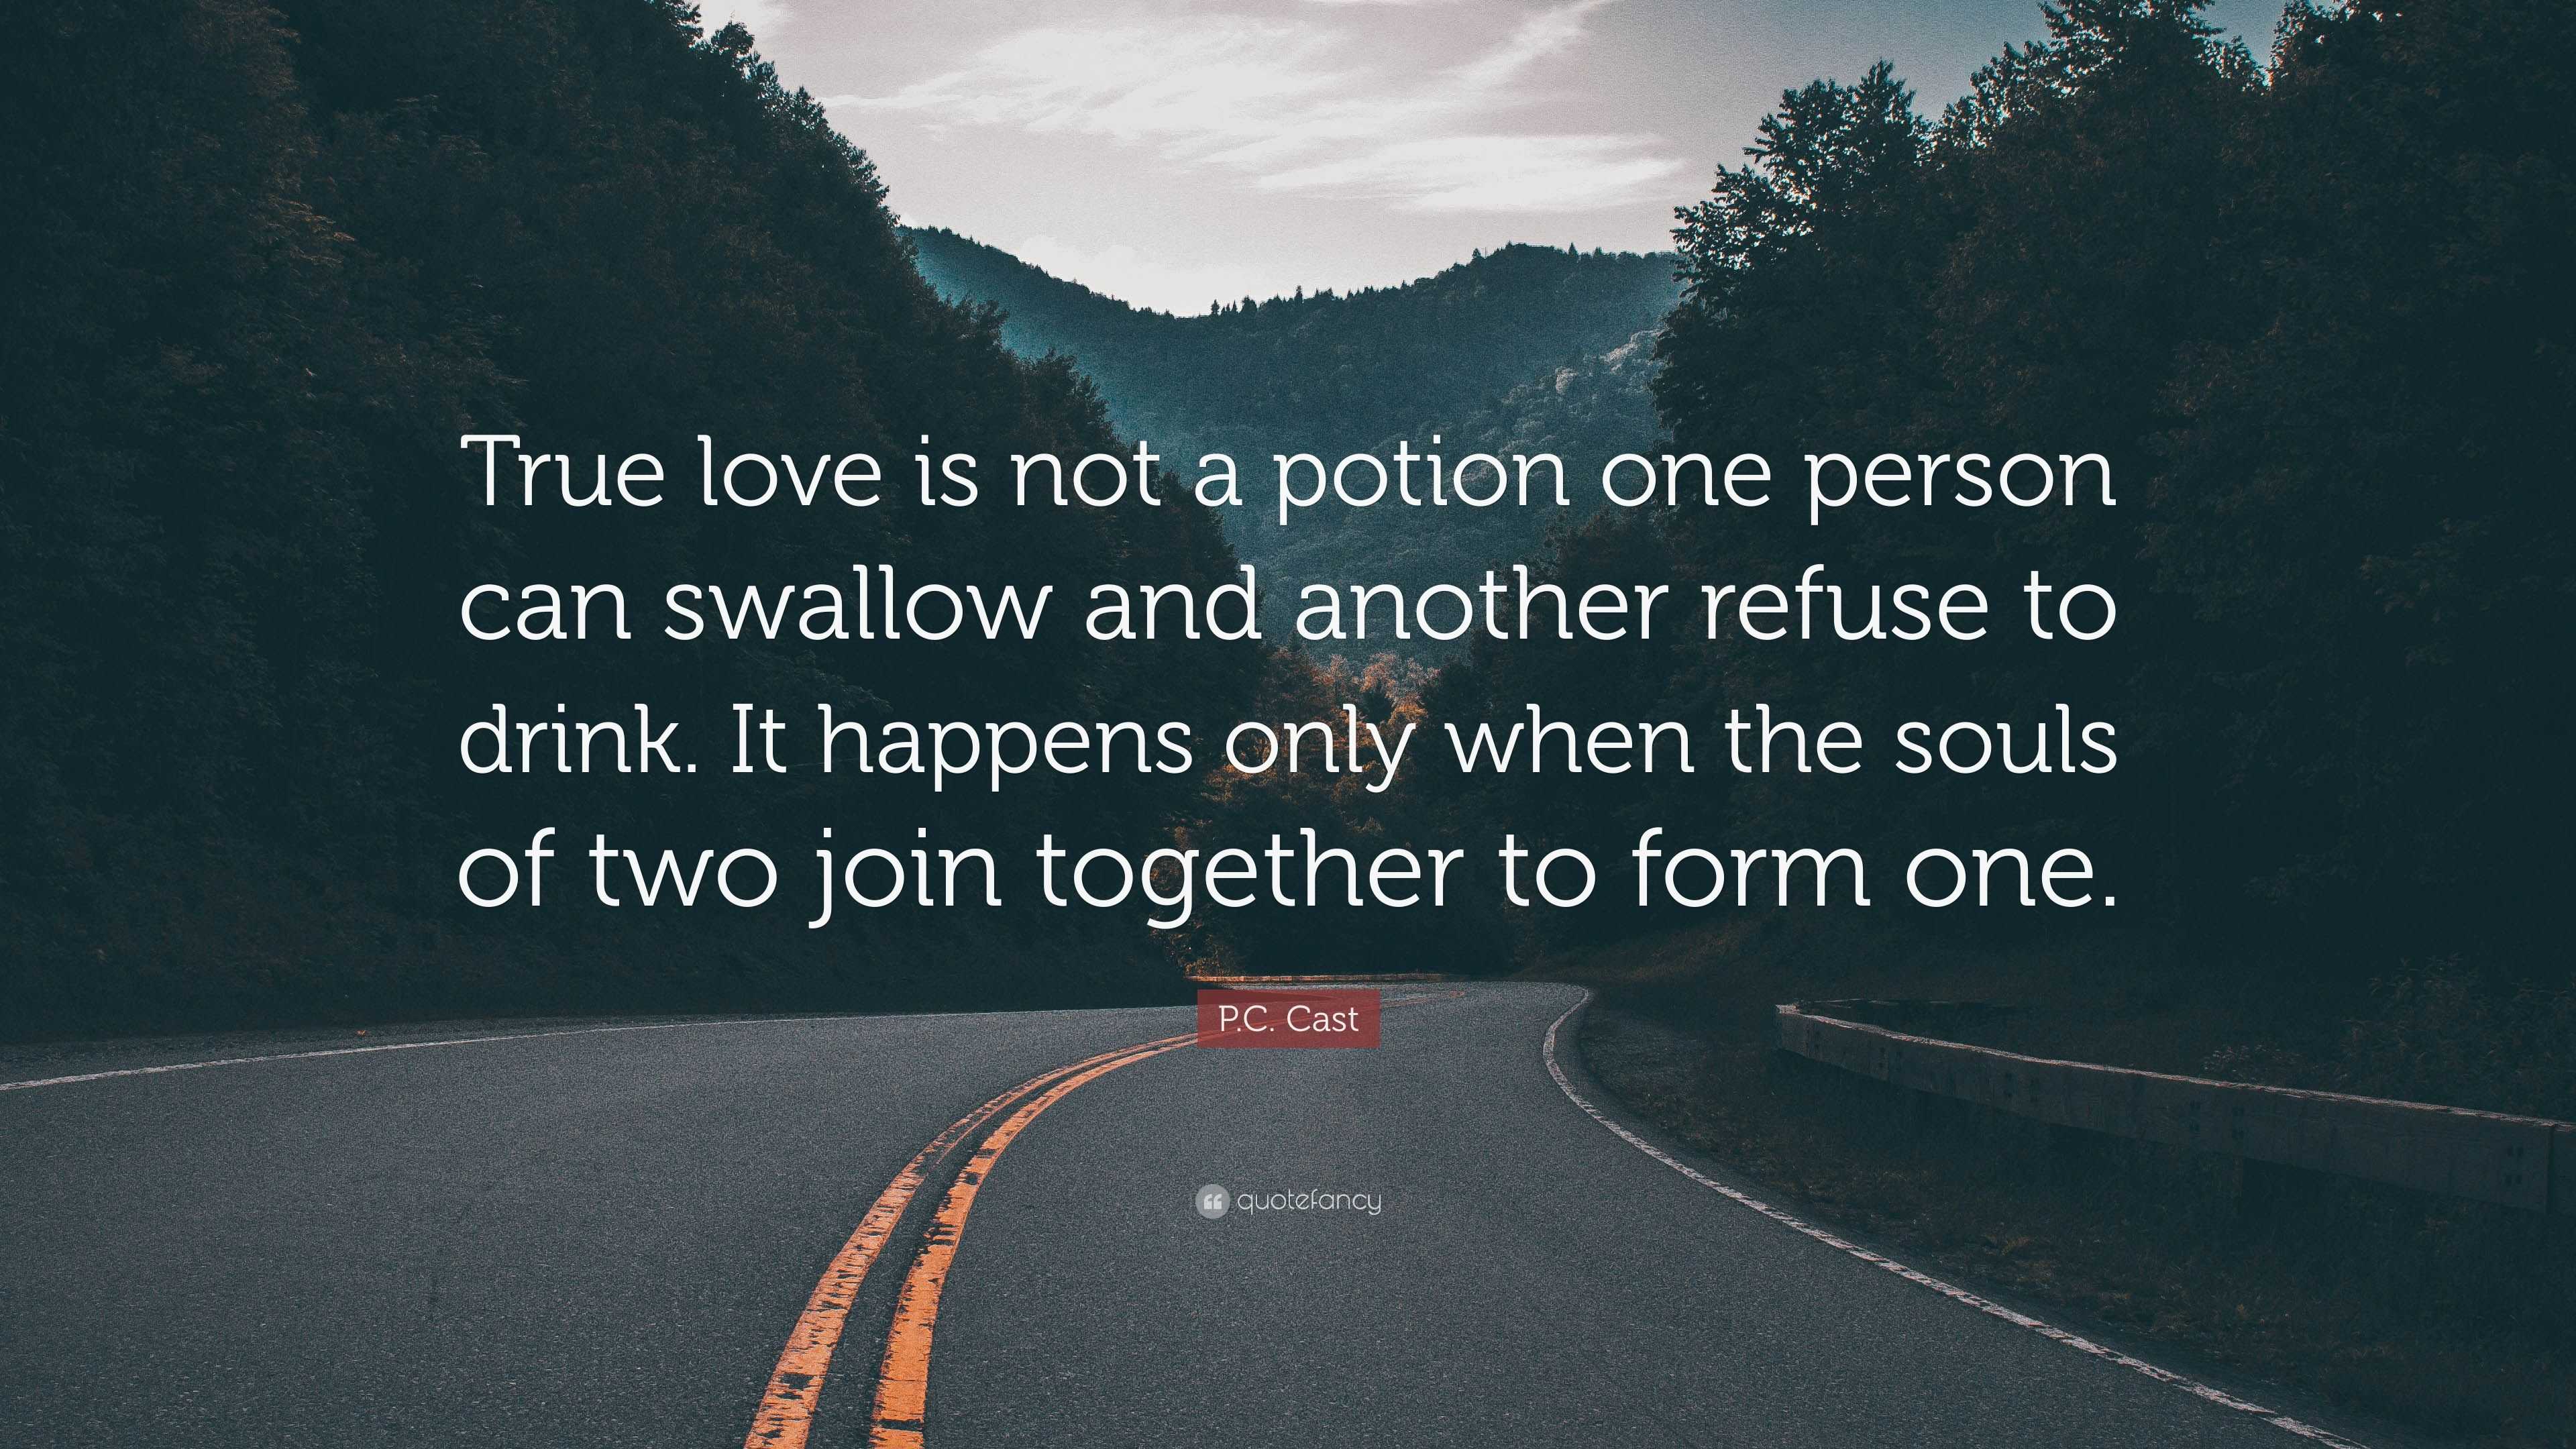 P.C. Cast Quote: “True love is not a potion one person can swallow and  another refuse to drink. It happens only when the souls of two join”